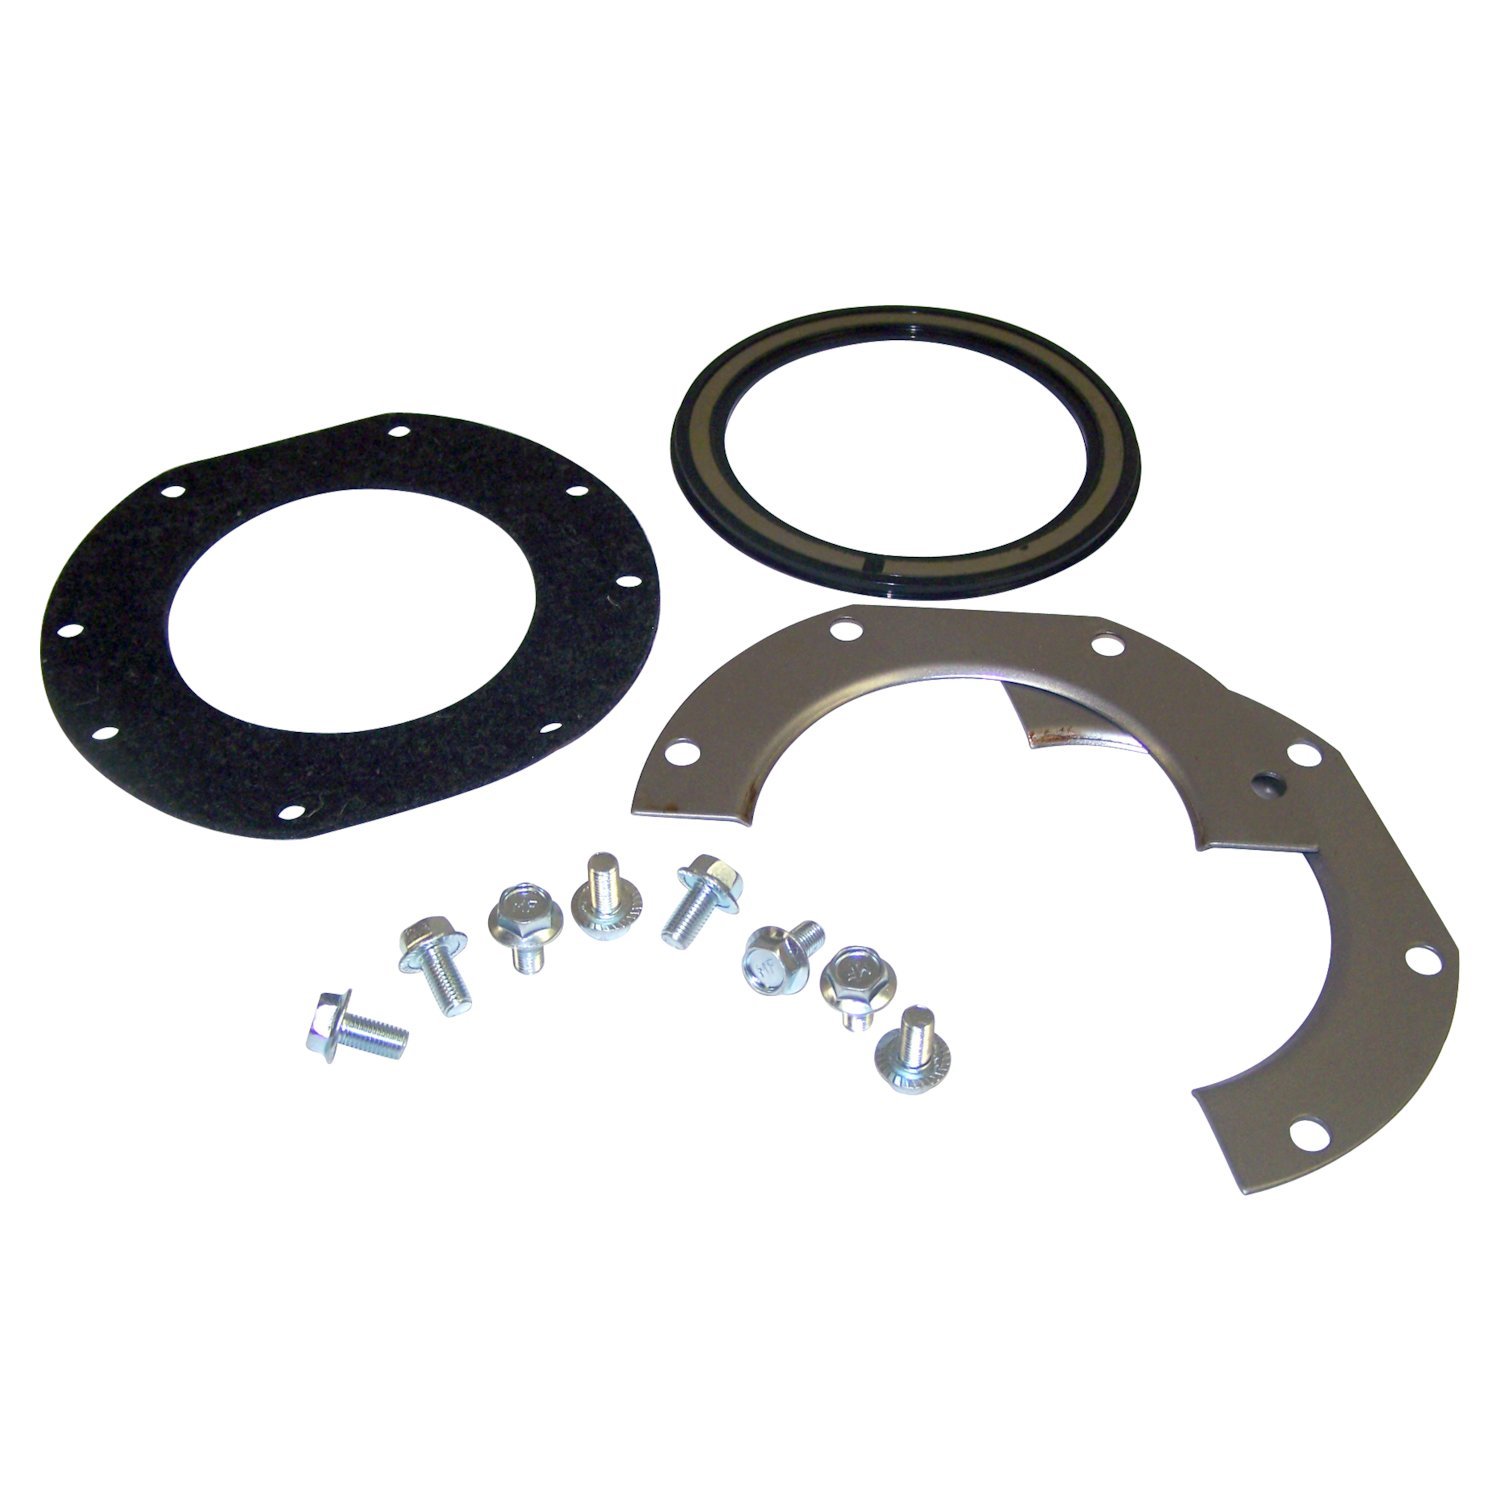 Steering Knuckle Seal Kit, Incl. 2 Retaining Plates, 2 Seals & 8 Bolts